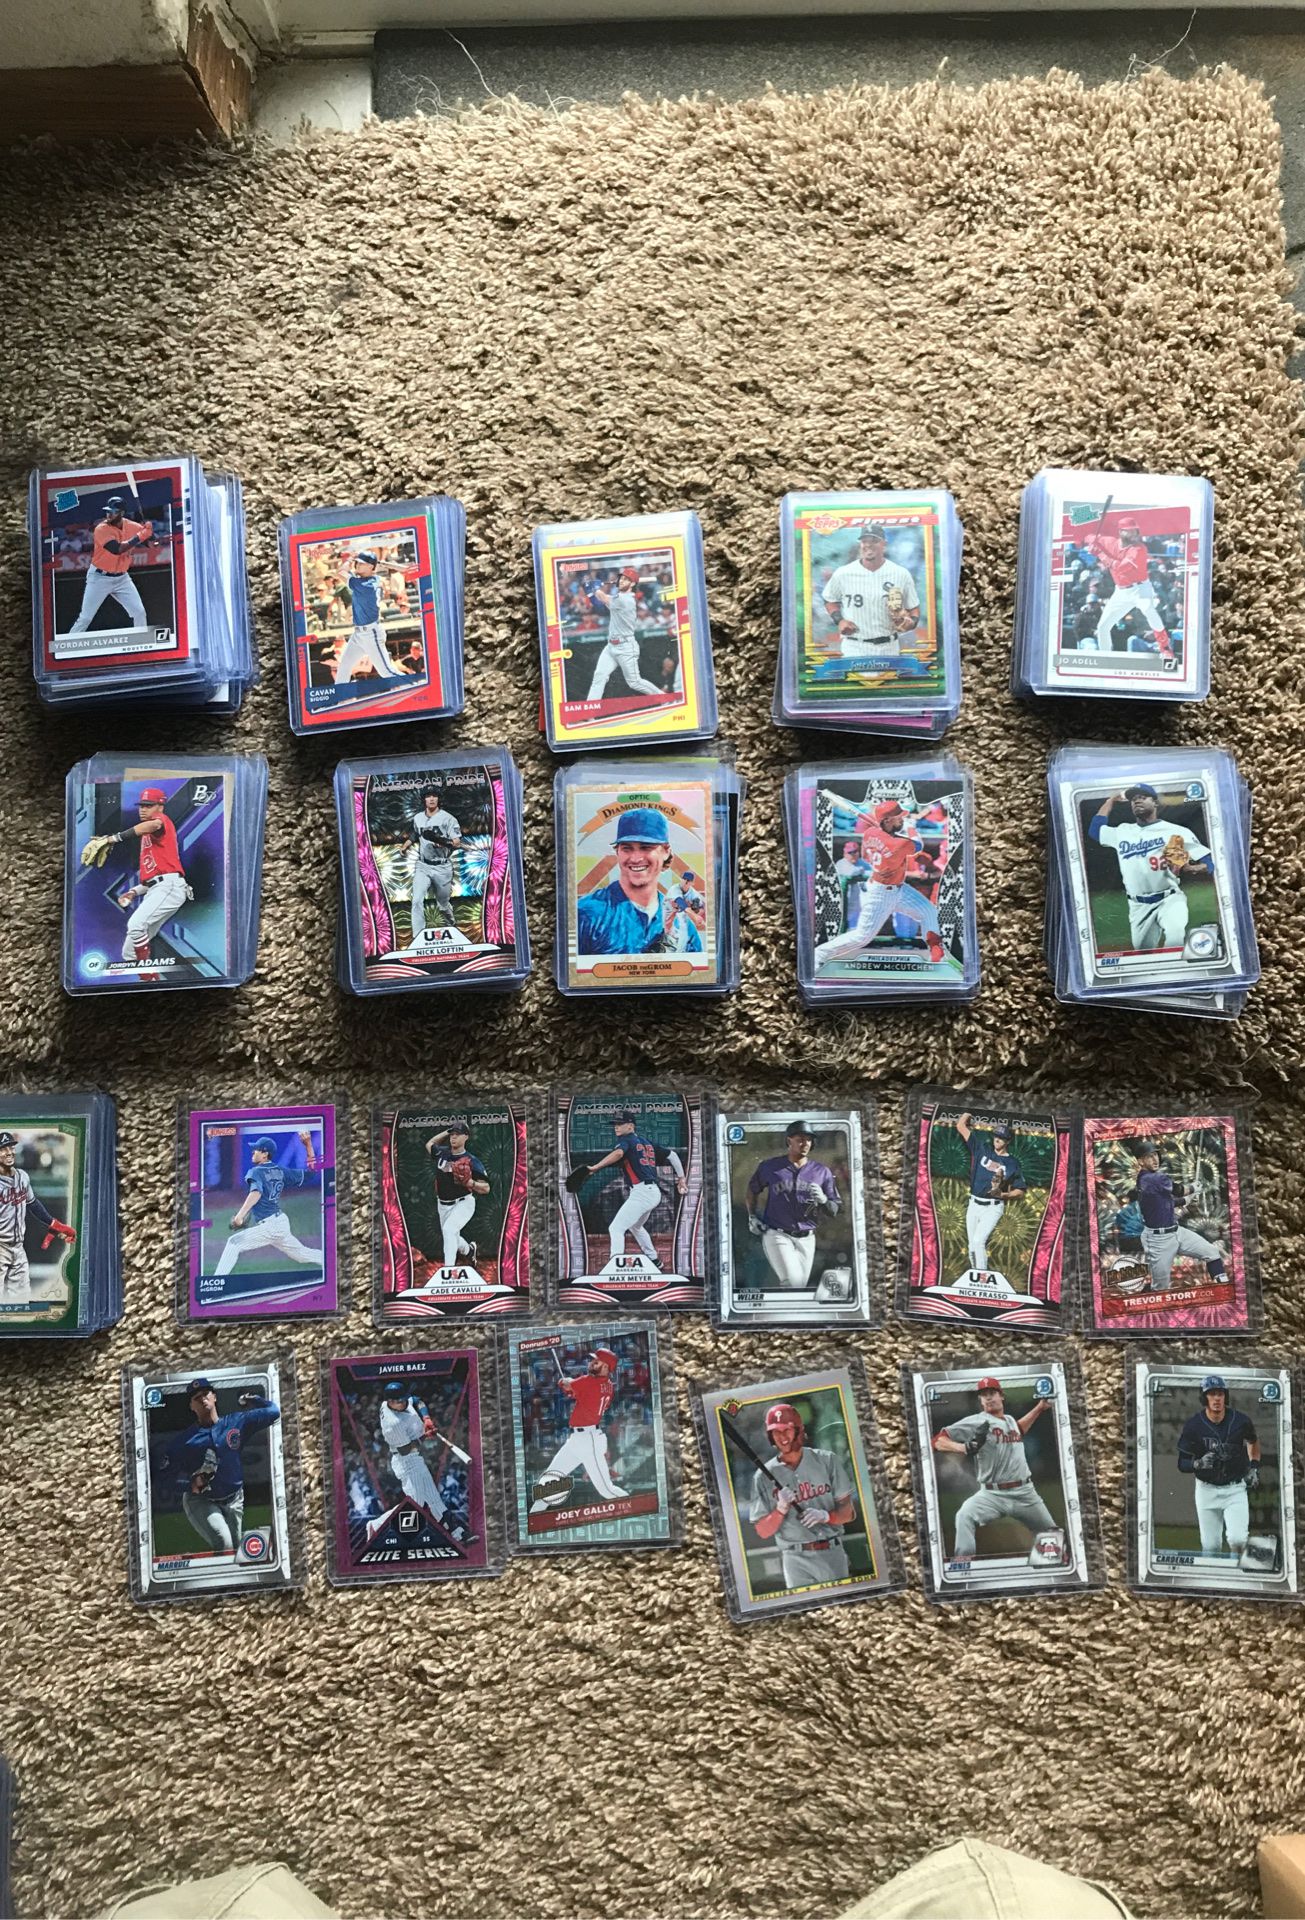 45 for the lot all newer baseball cards